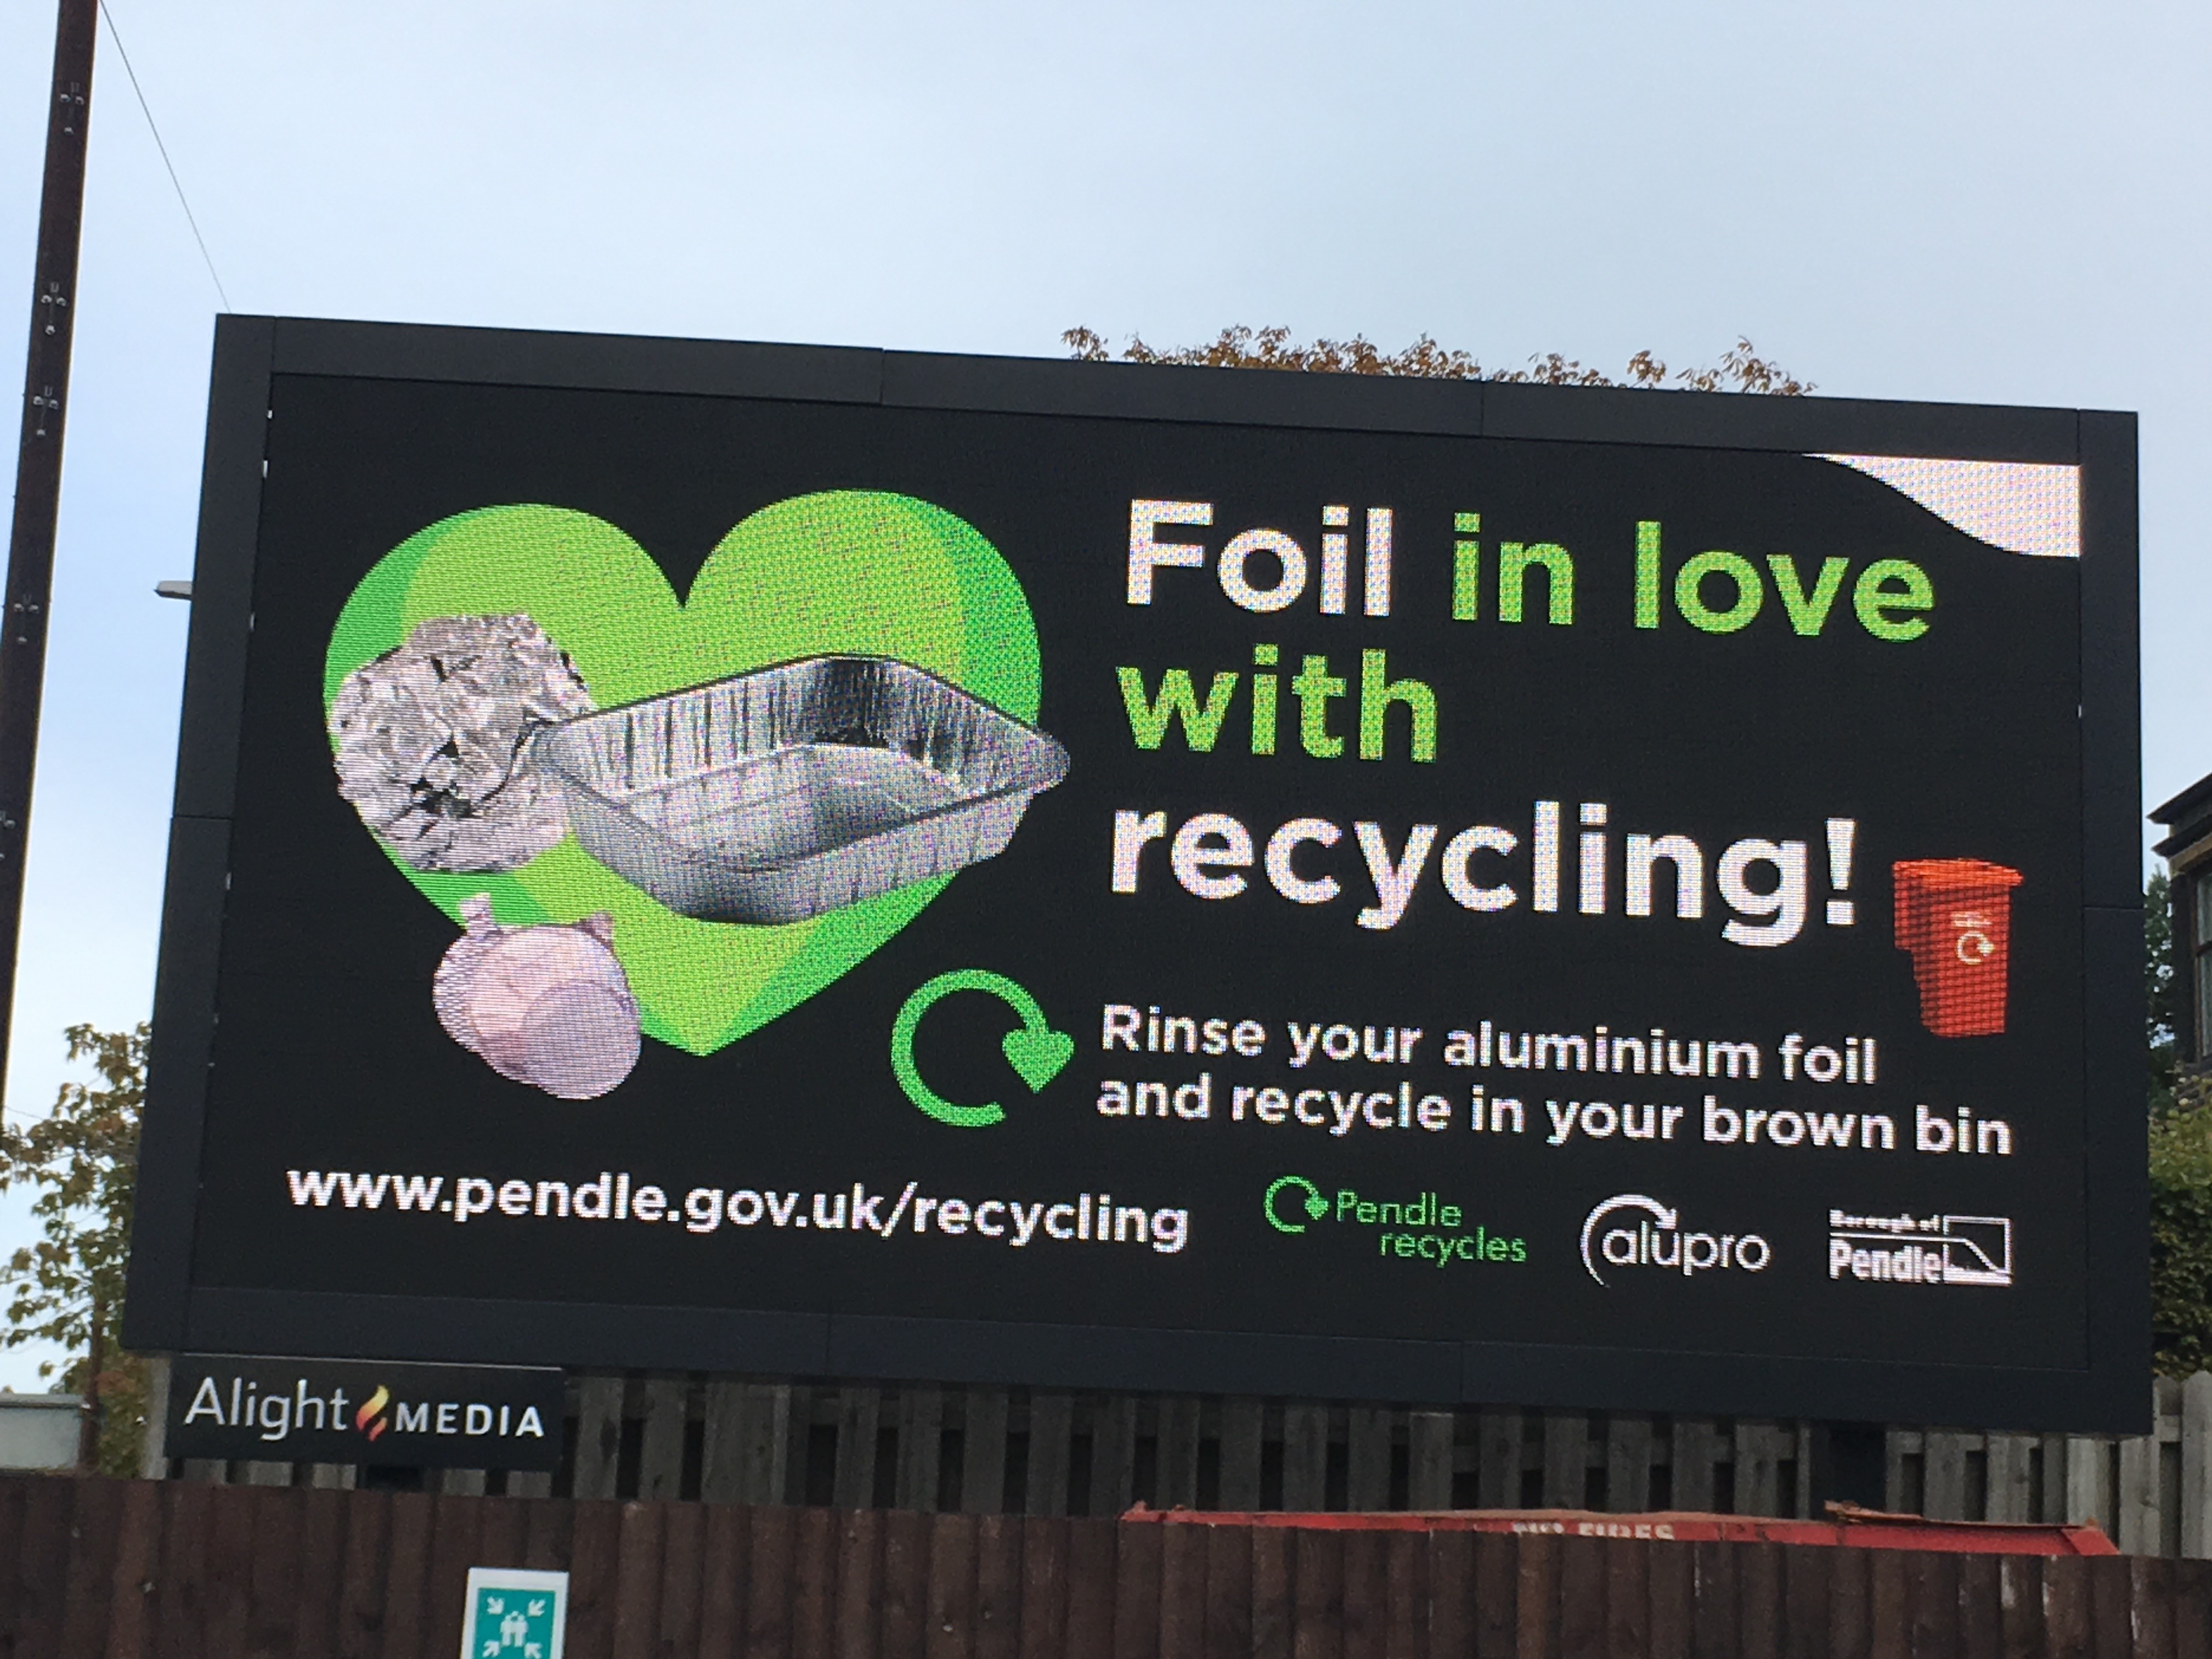 ‘Foil in Love with Recycling’ a new initiative by Pendle Borough Council and Alupro 